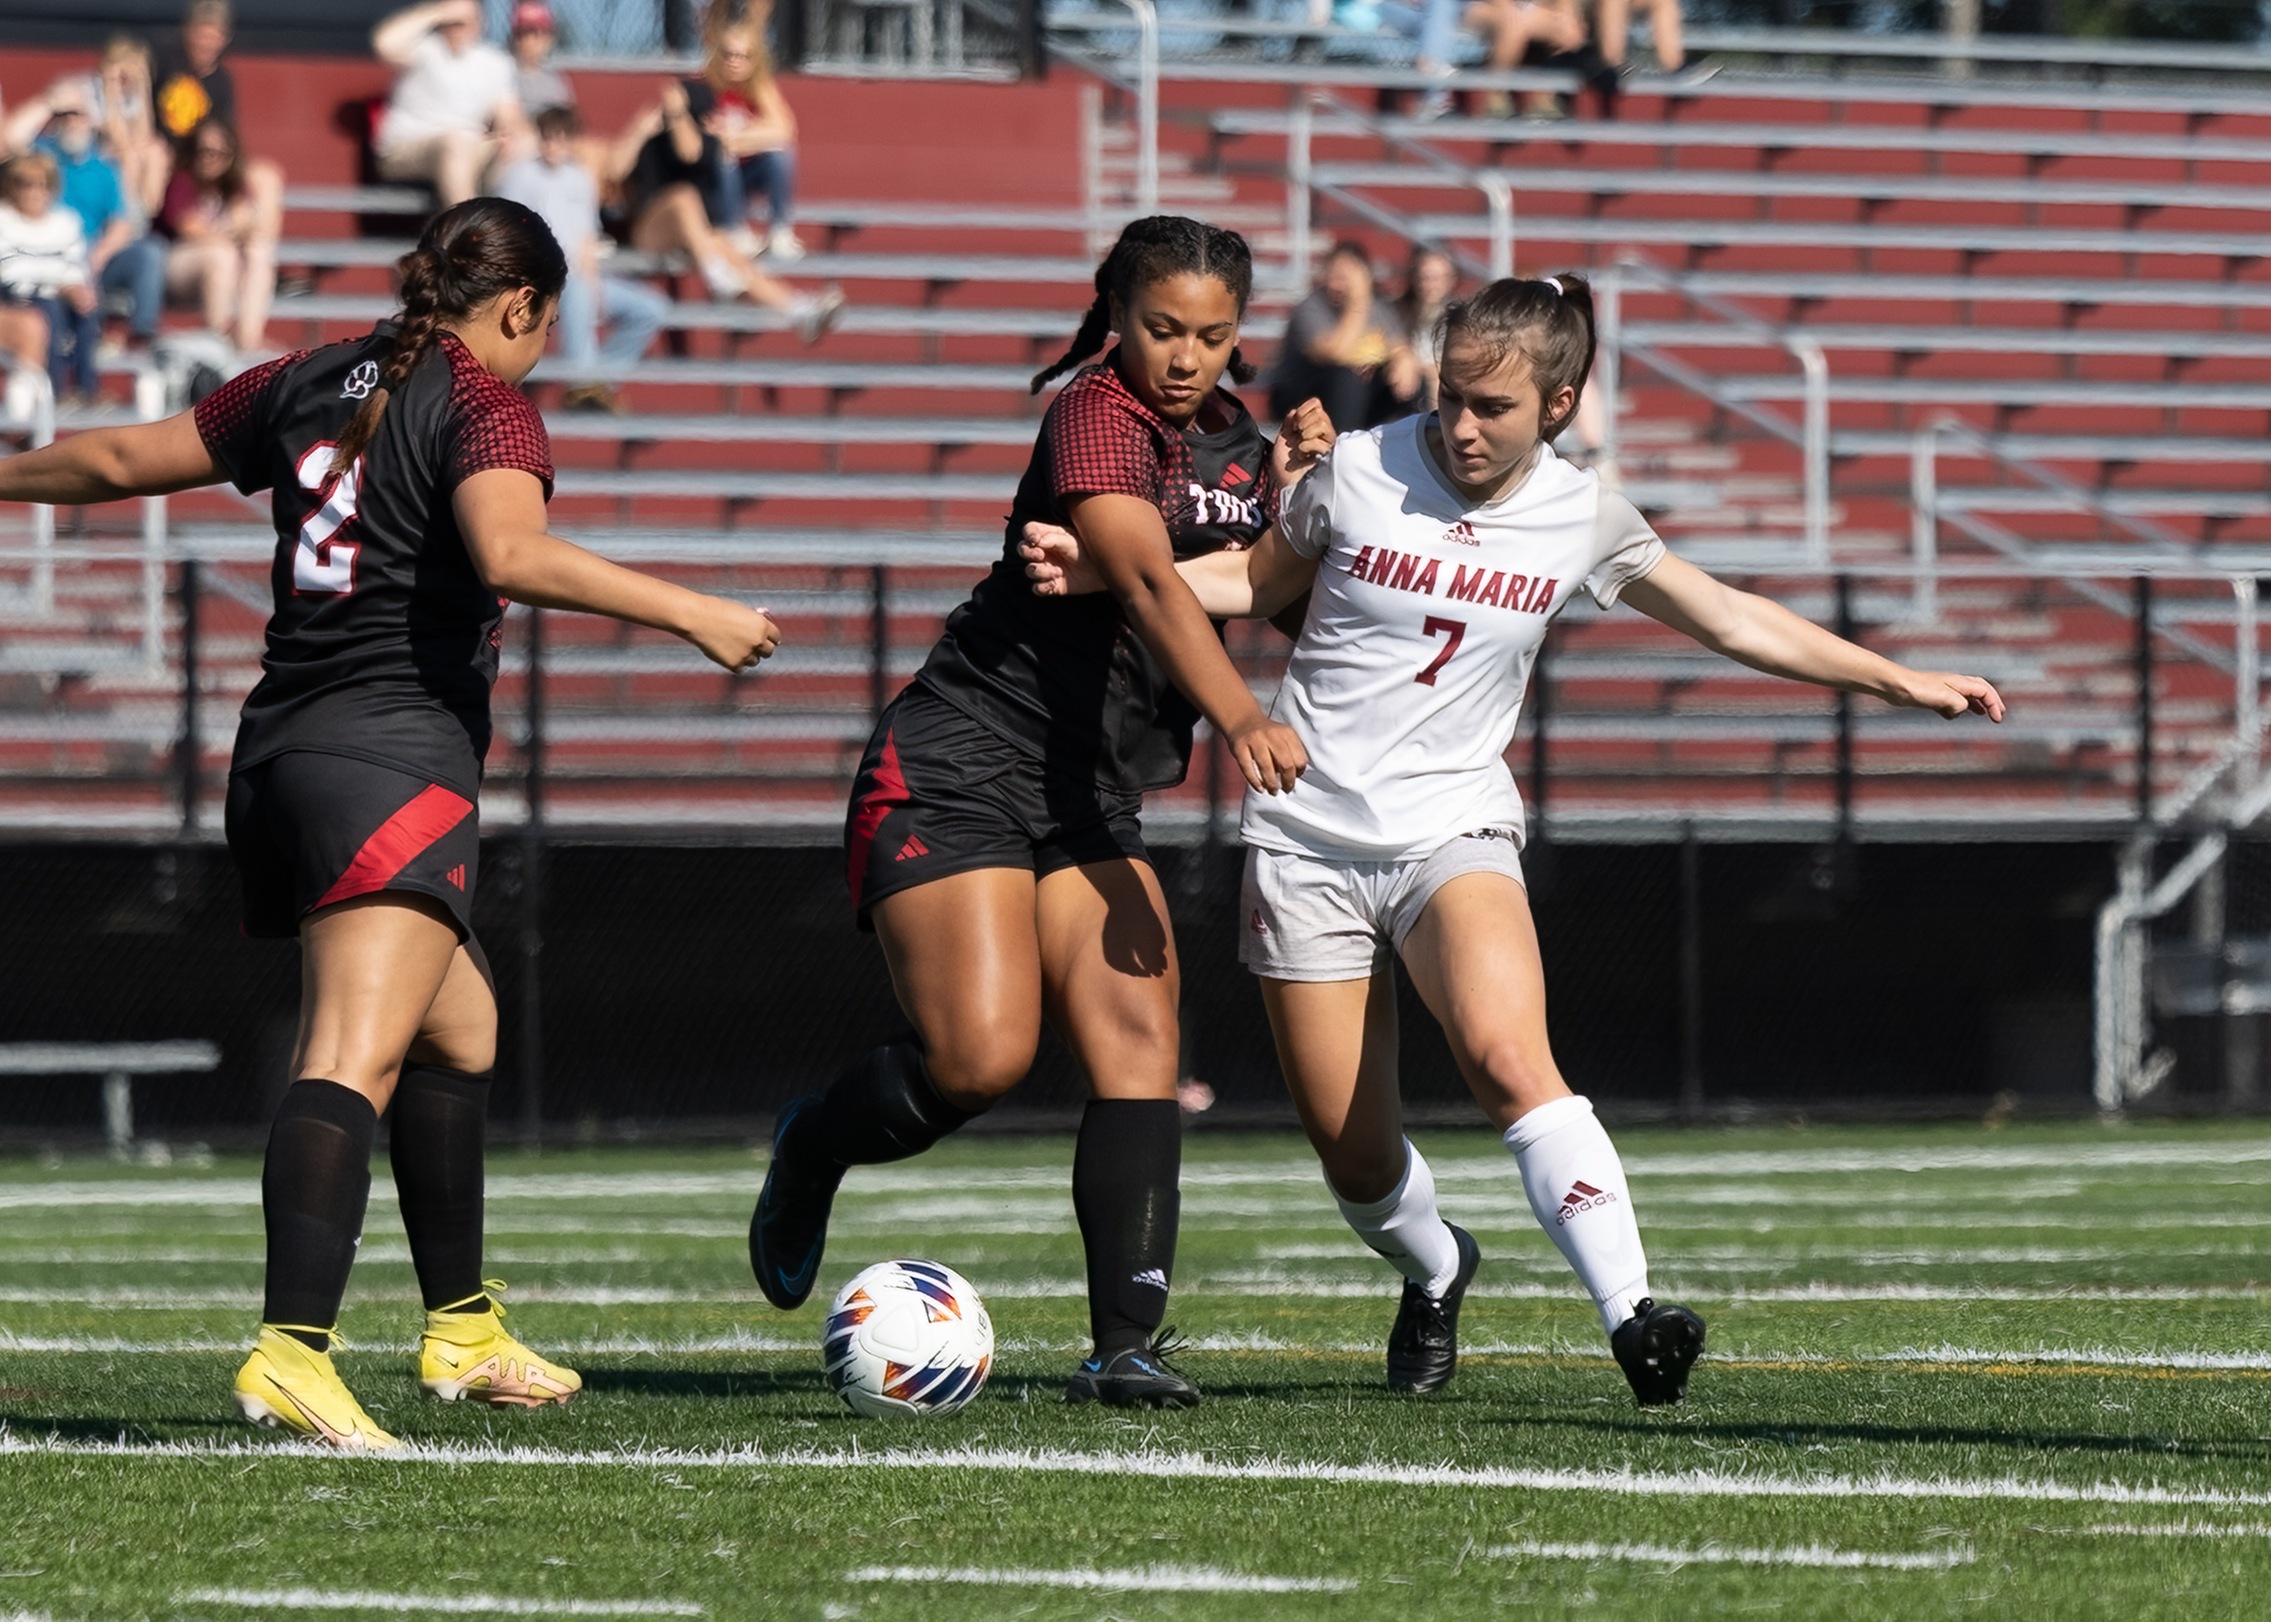 Women's Soccer Shutout By Monks On The Road